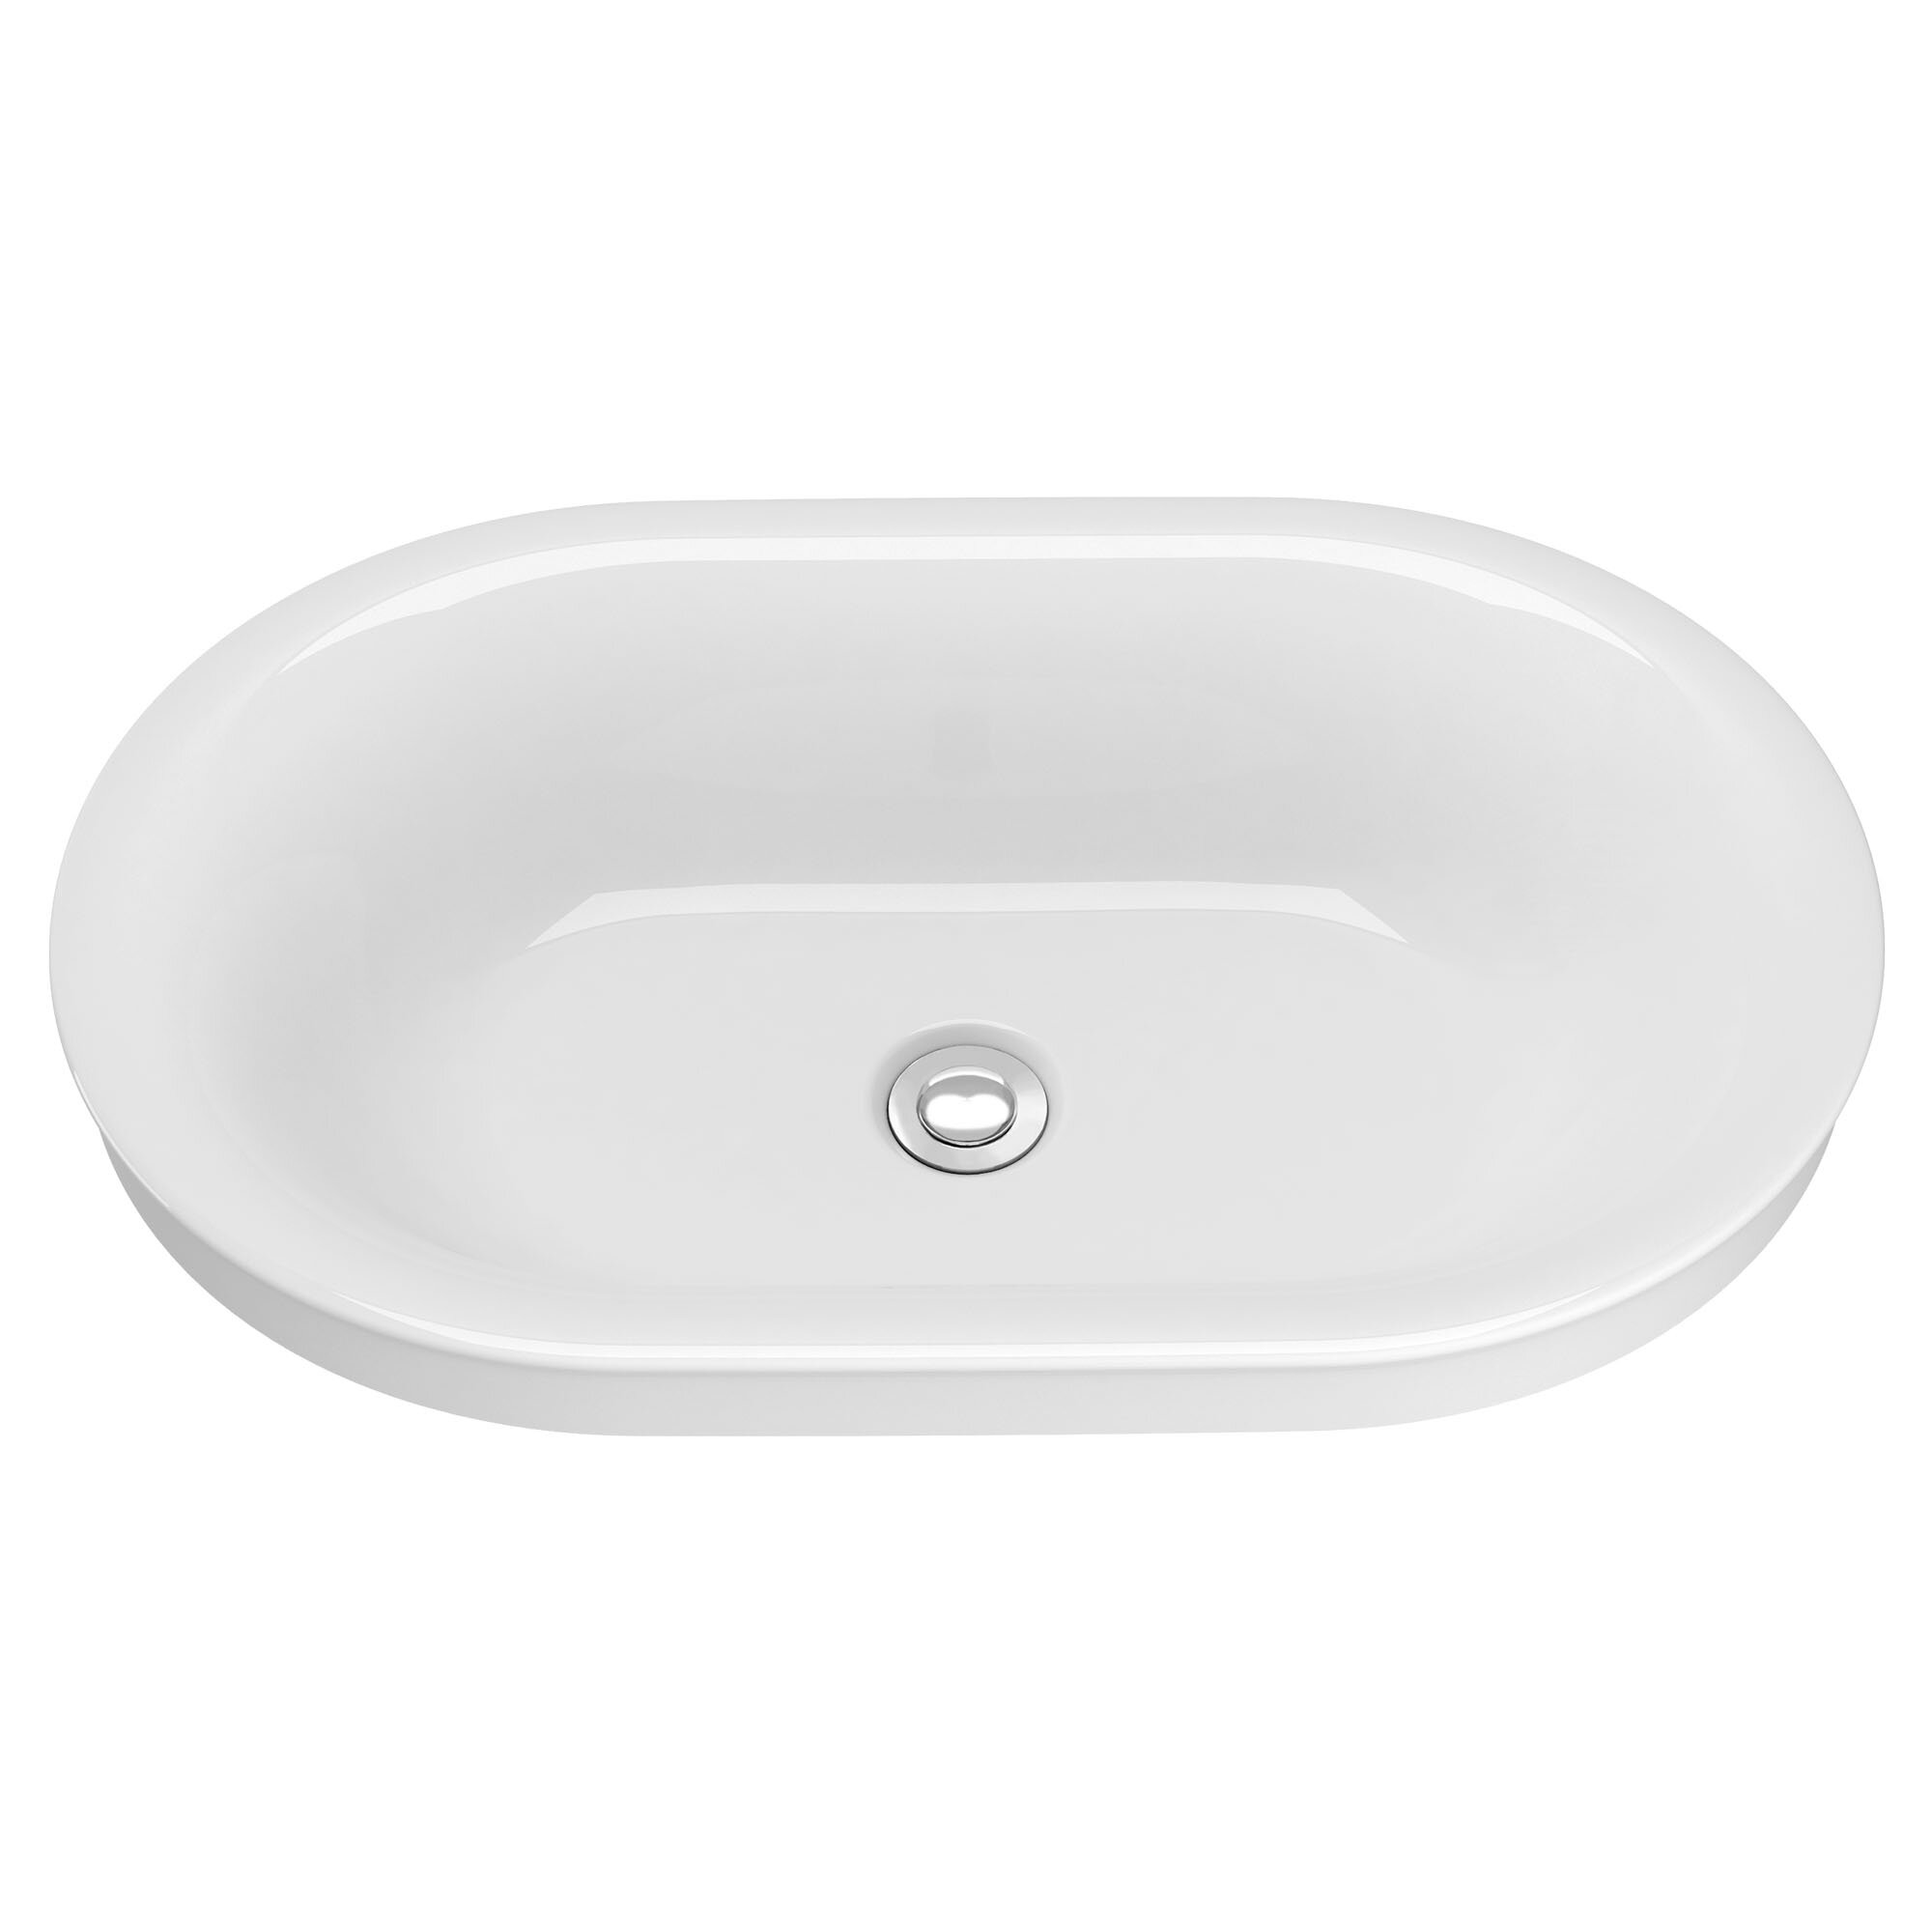 American Standard Studio S 14'' White Vitreous China Oval Semi-Recessed  Vessel Bathroom Sink with Overflow